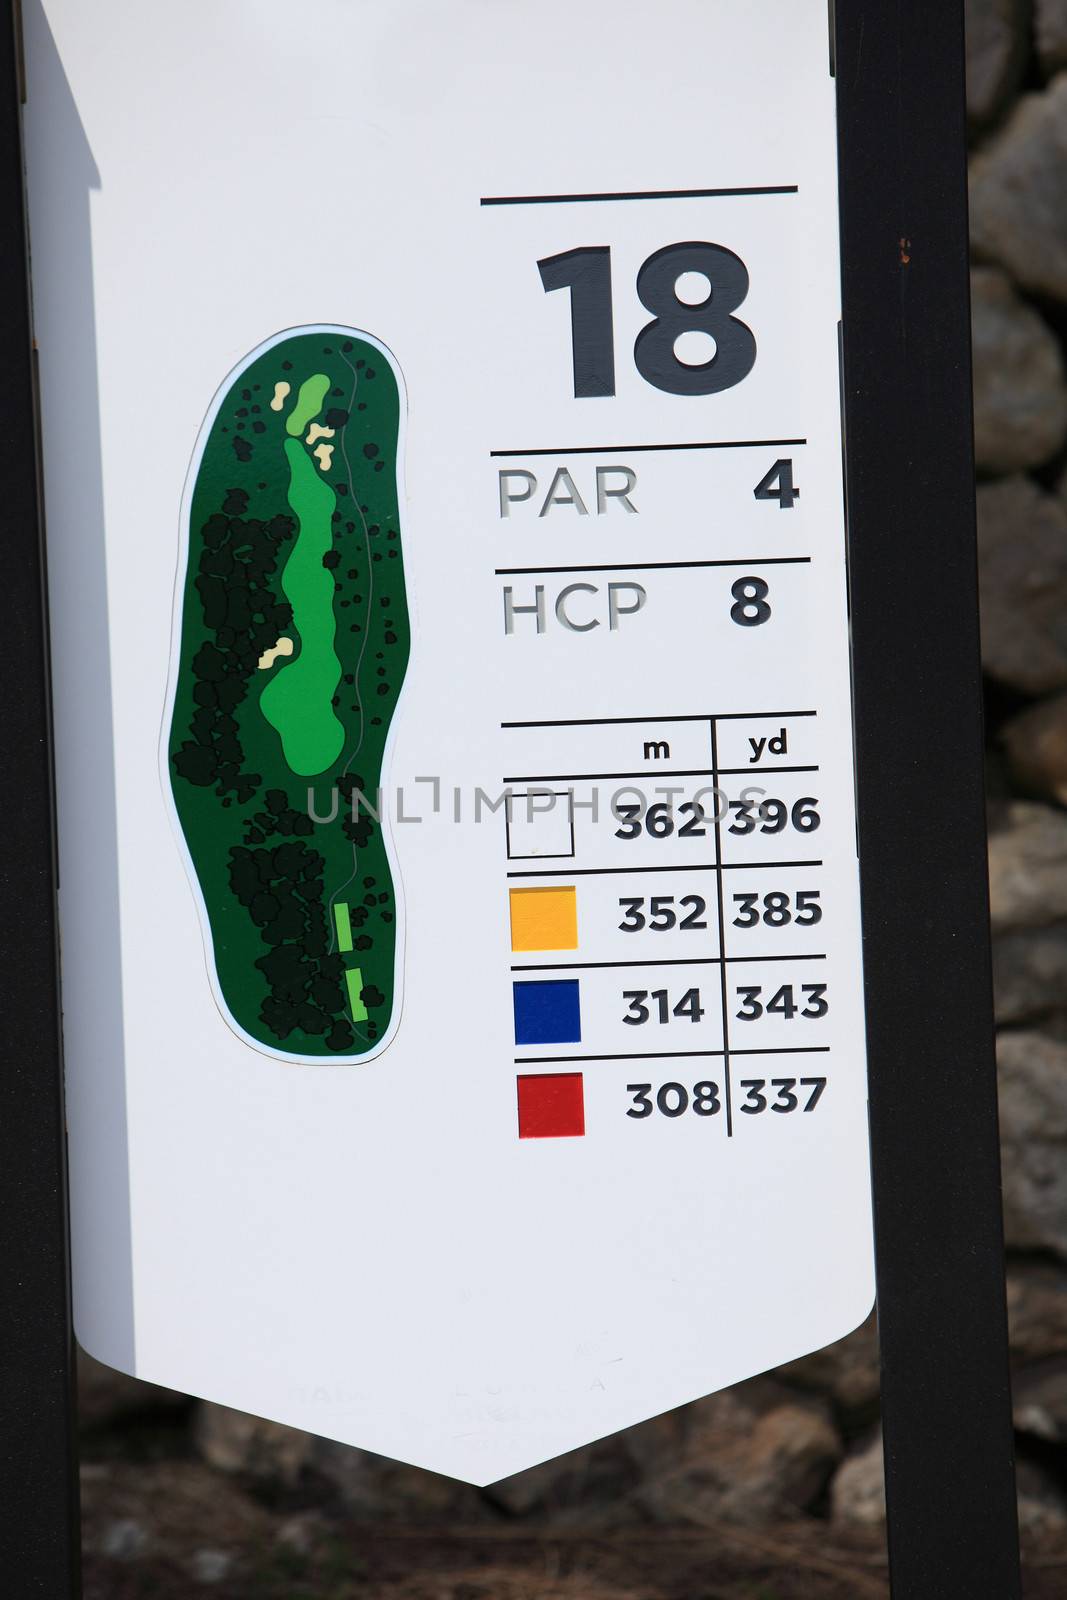 Information marker on a golf course at the tee of the 18th hole giving distances and the par, or number of average strokes required to complete the hole